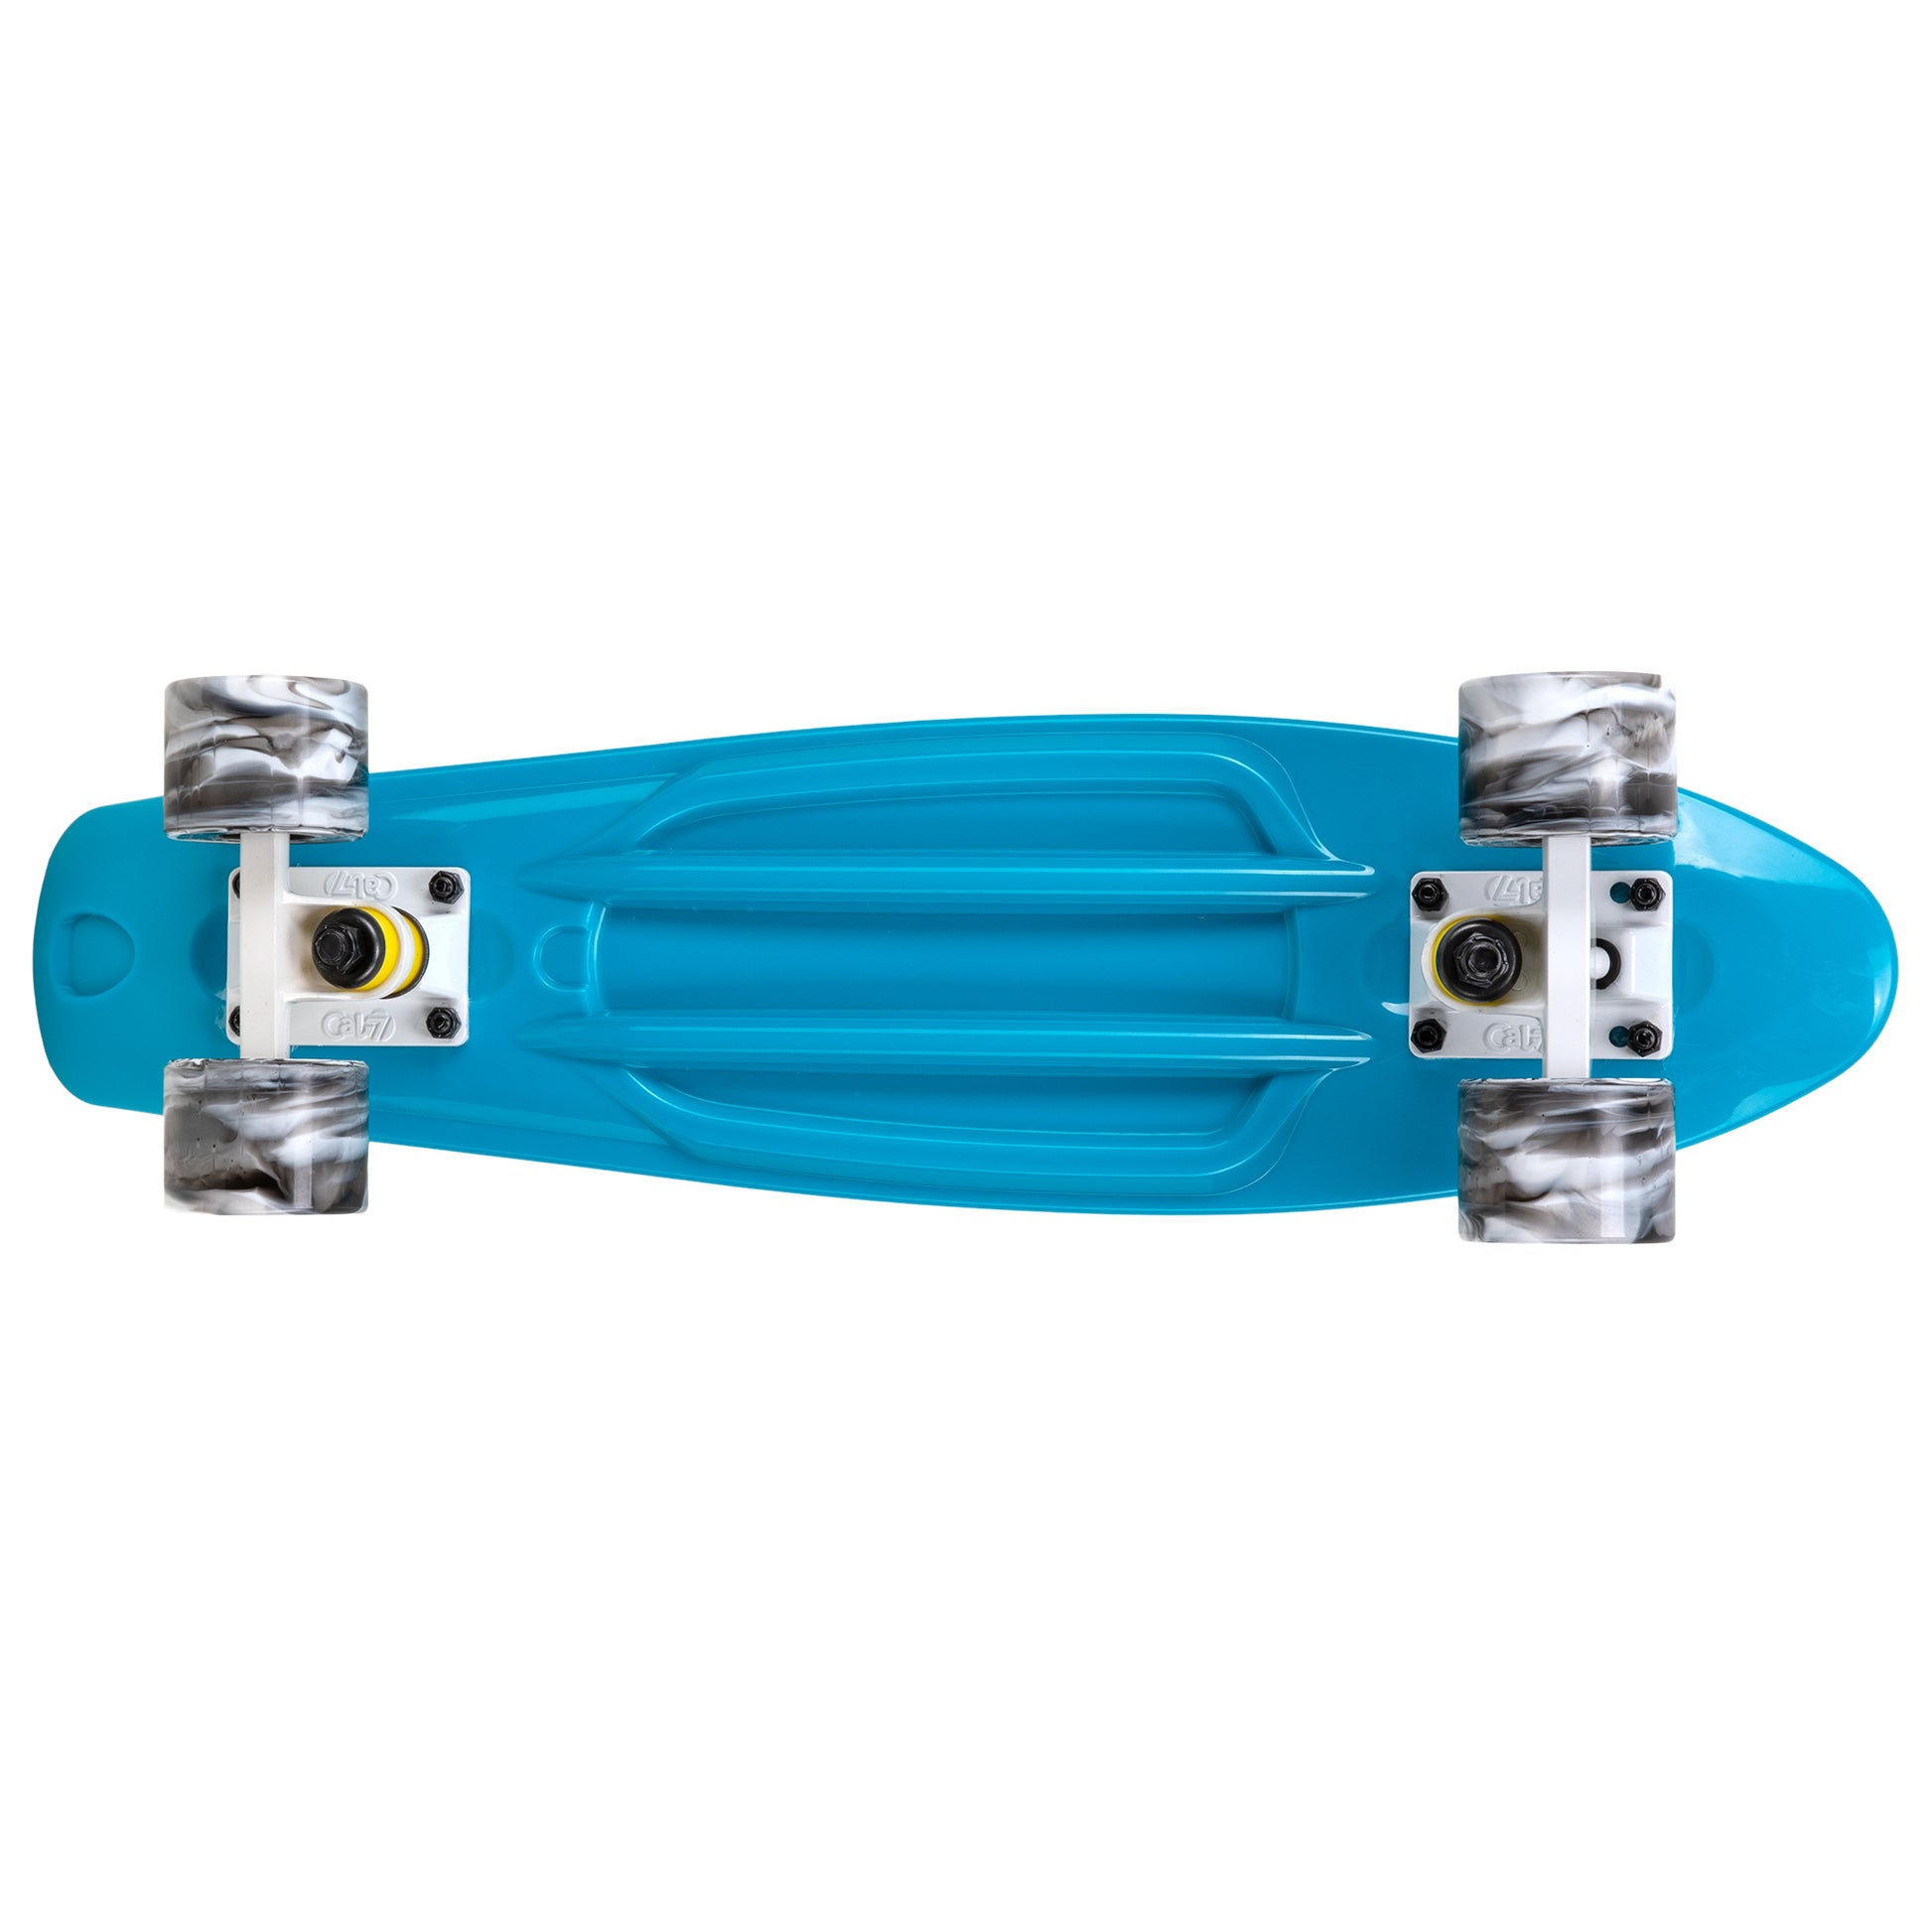 Cal 7 Oceanic 22.5” Mini Cruiser with Swirl Wheels -featuring a muted blue plastic deck, 78A black and white wheels. 